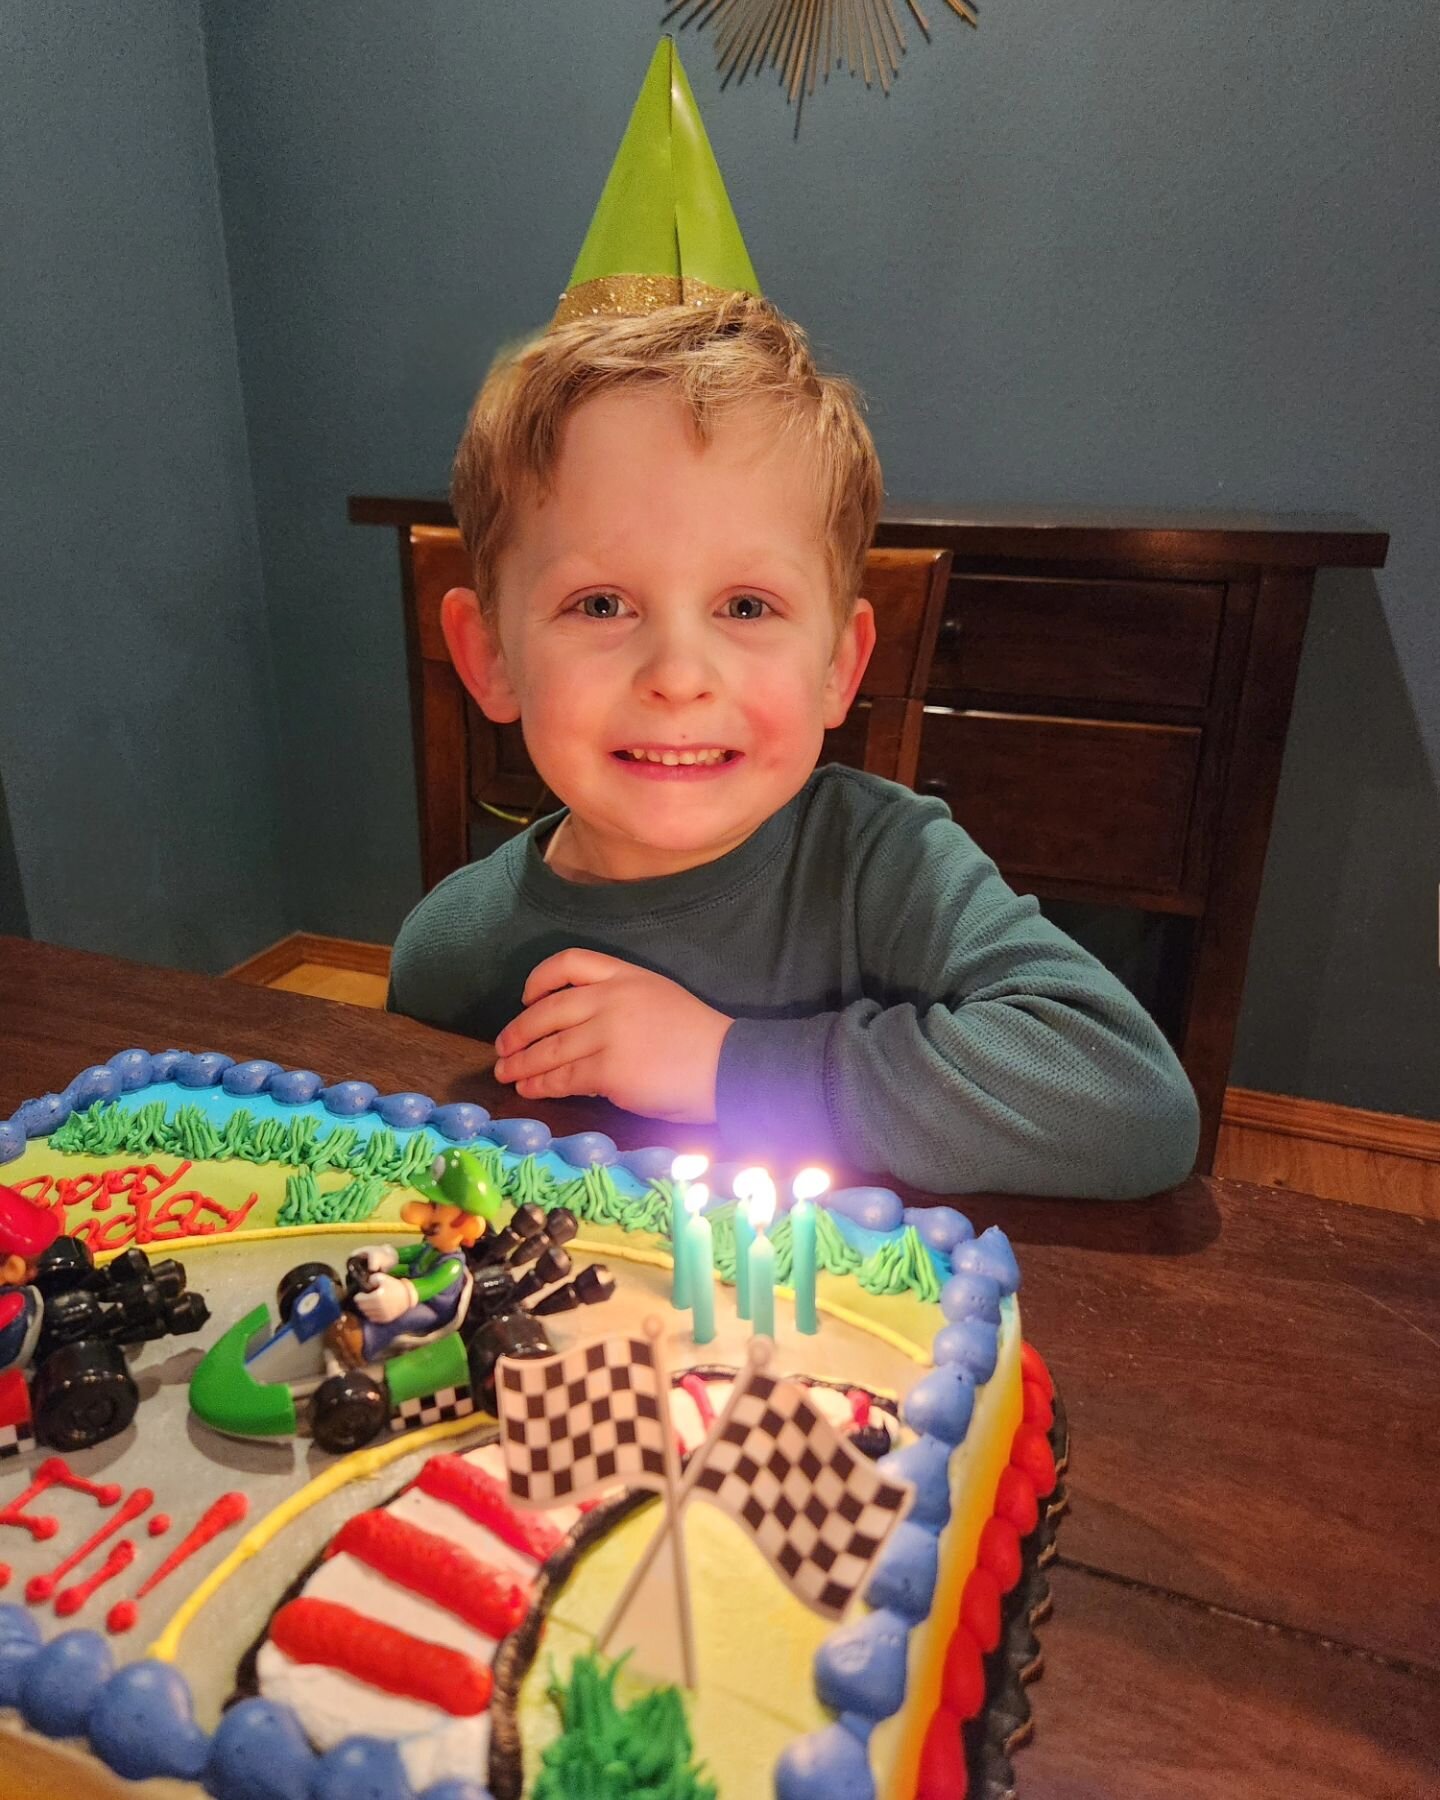 I waited so long to have you, and five years have gone by in a blink.

Thanks for just being you. That's always more than enough. 

Happy fifth birthday, Elijah Michael.